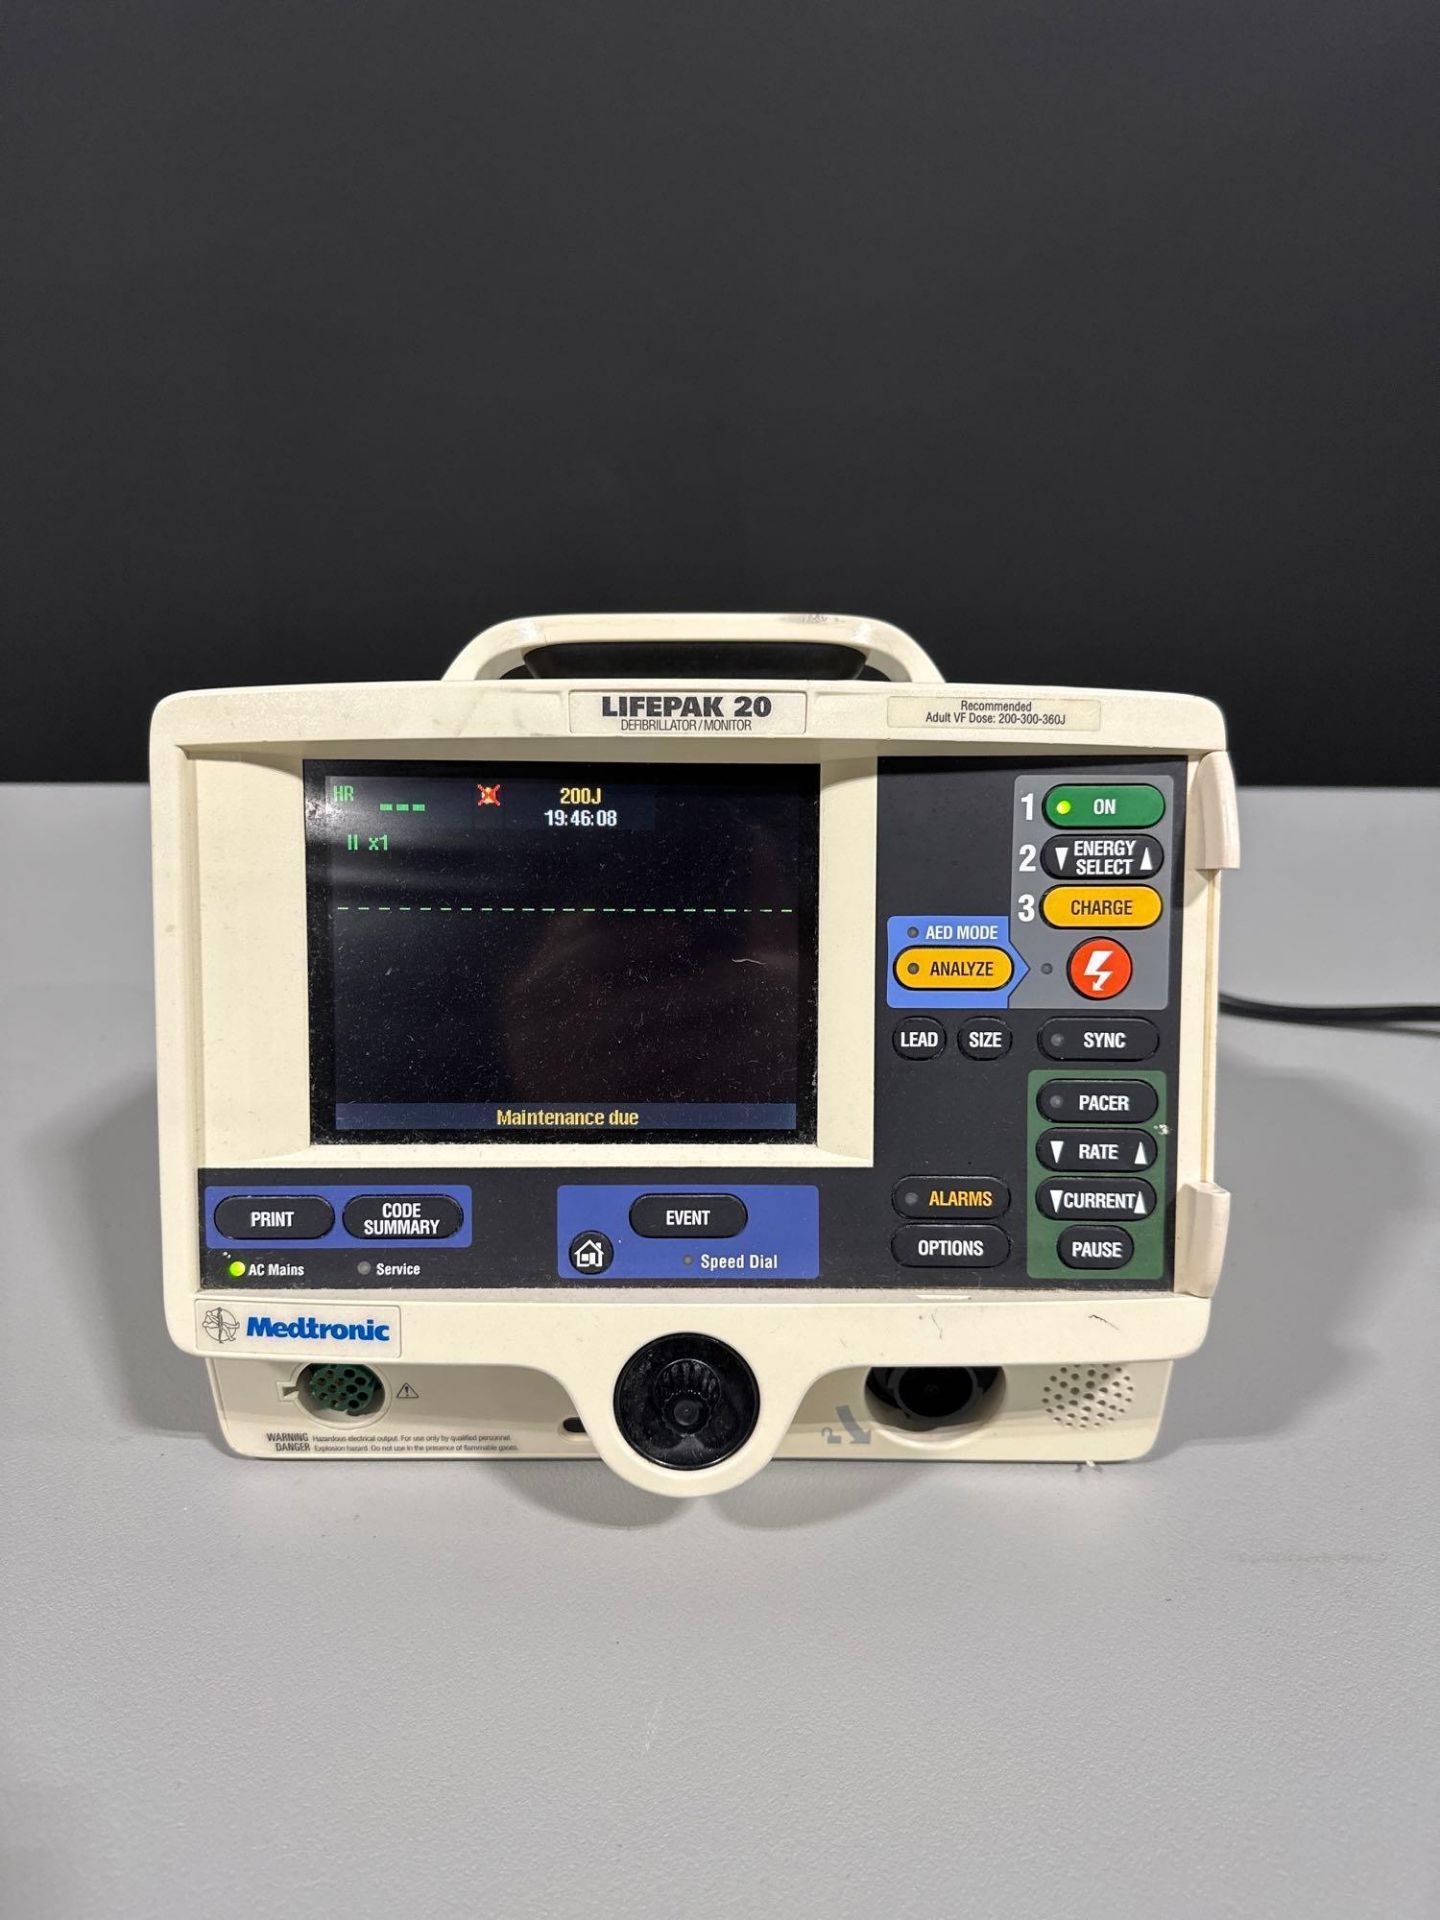 MEDTRONIC/PHYSIO CONTROL LIFEPAK 20 DEFIB WITH PACING, 3 LEAD ECG, ANALYZE (AED MODE)